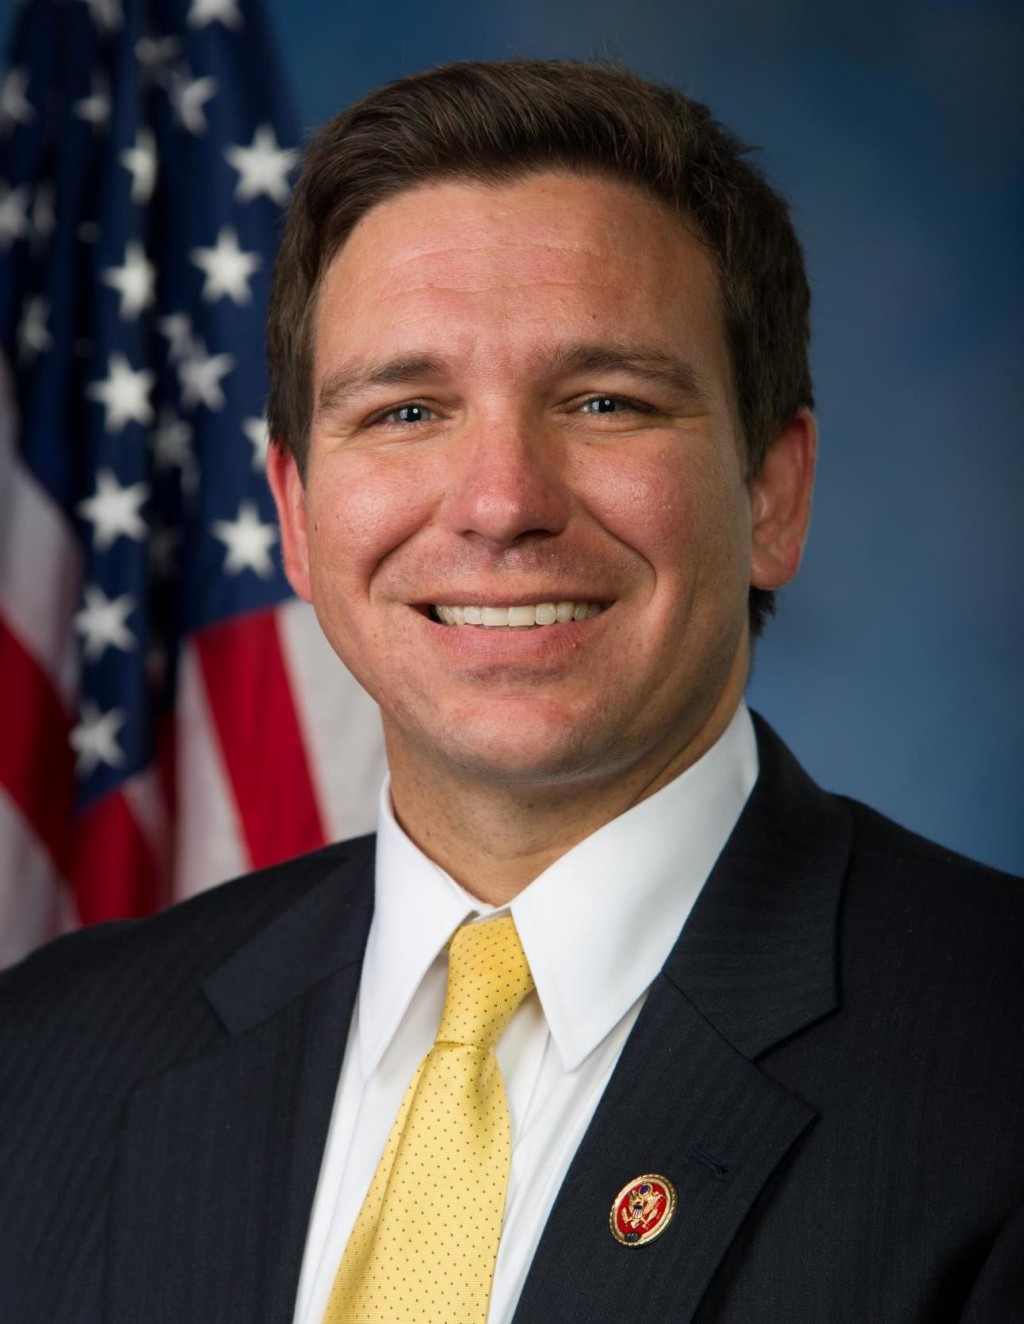 DeSantis wins tight race for governor